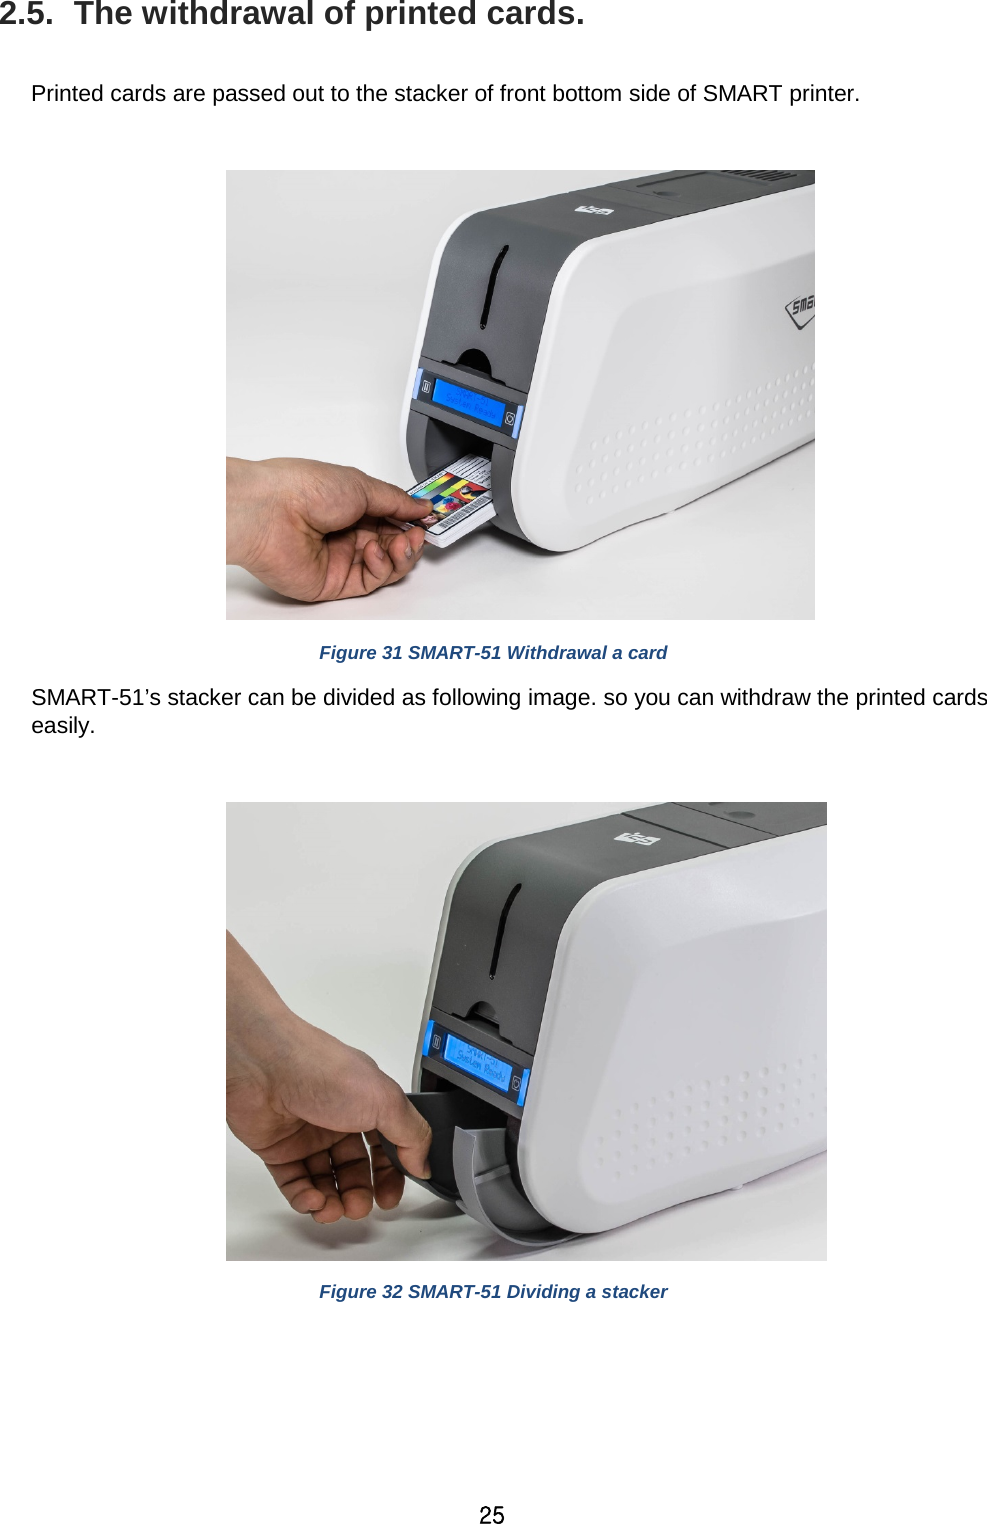 25 2.5.  The withdrawal of printed cards.  Printed cards are passed out to the stacker of front bottom side of SMART printer.     Figure 31 SMART-51 Withdrawal a card SMART-51’s stacker can be divided as following image. so you can withdraw the printed cards easily.     Figure 32 SMART-51 Dividing a stacker    